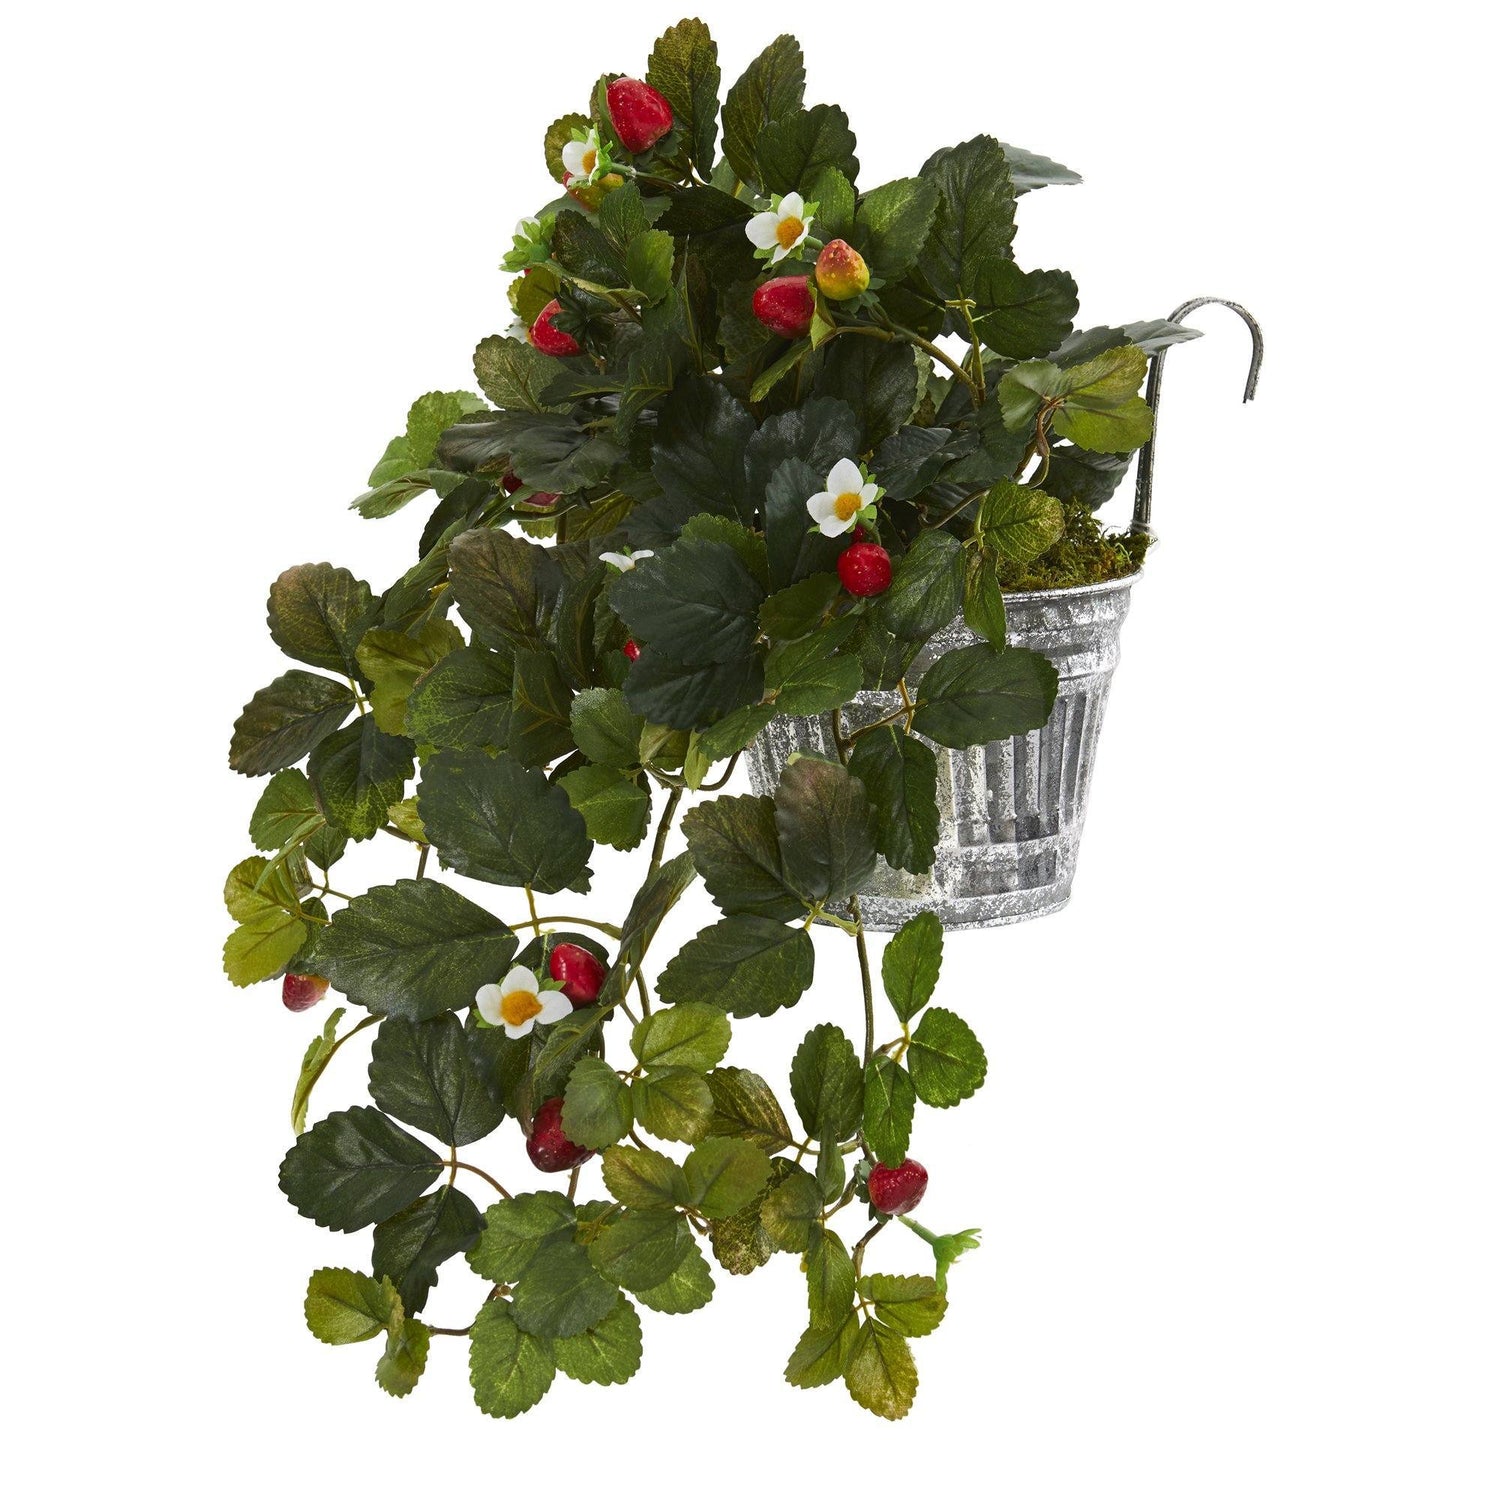 13” Strawberry Artificial Plant in Vintage Hanging Metal Planter